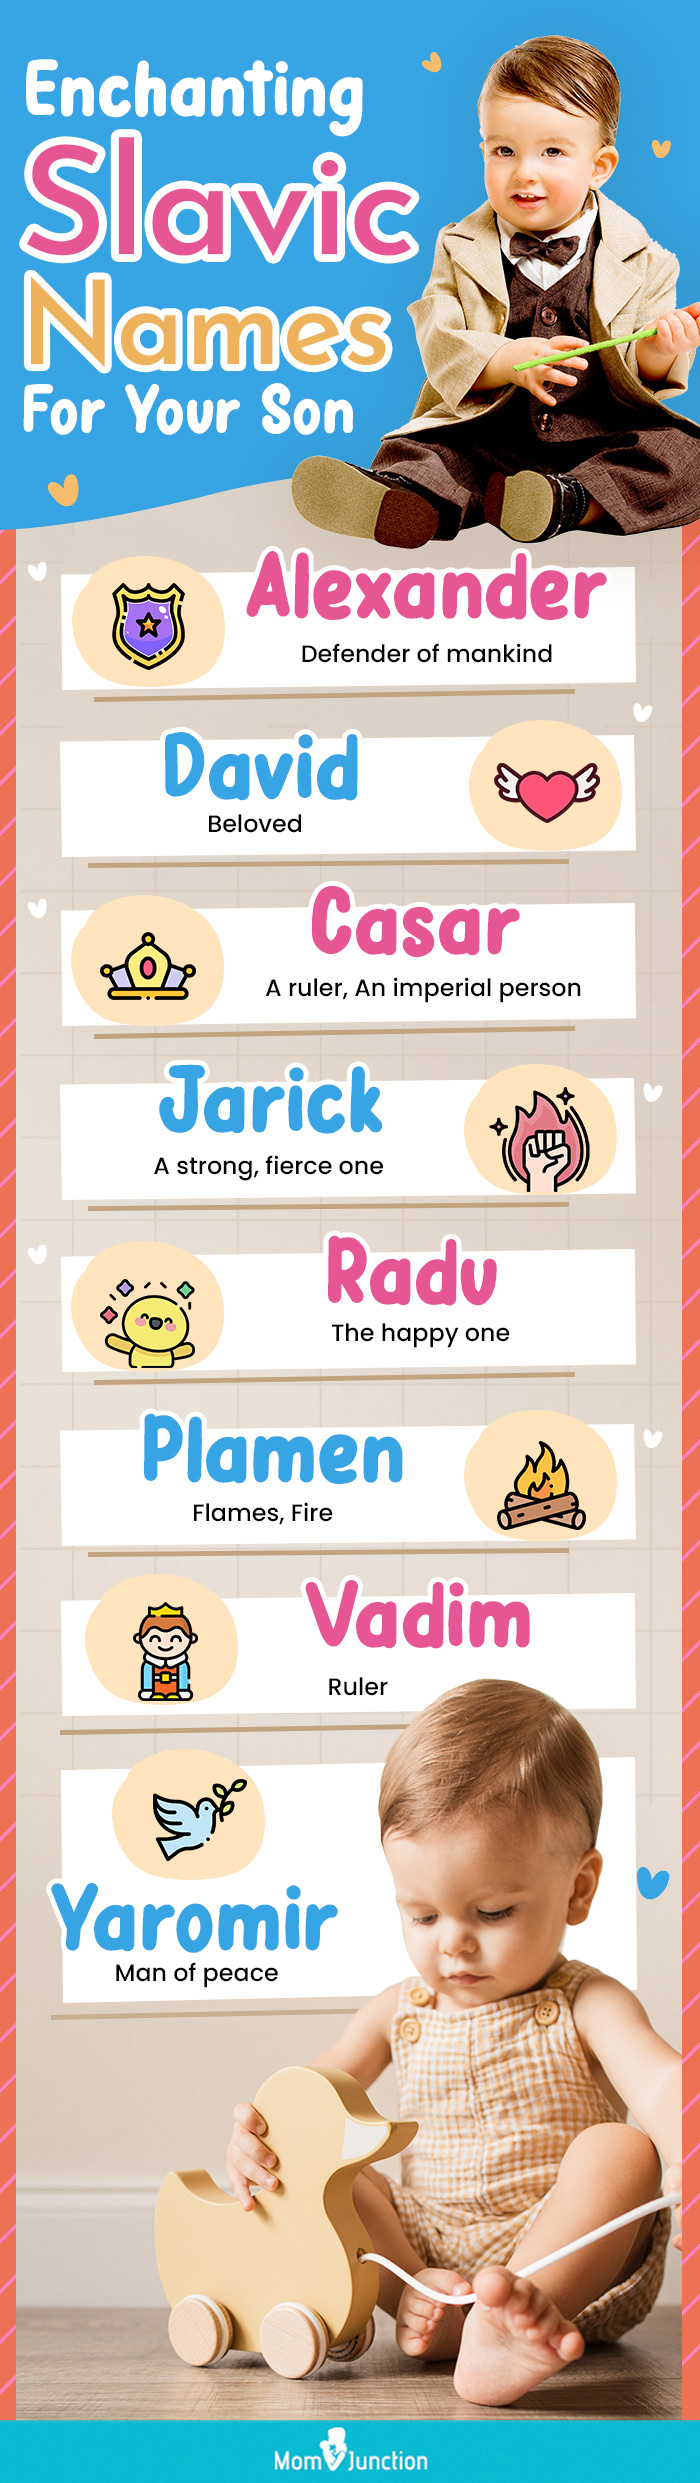 enchanting slavic names for your son (infographic)